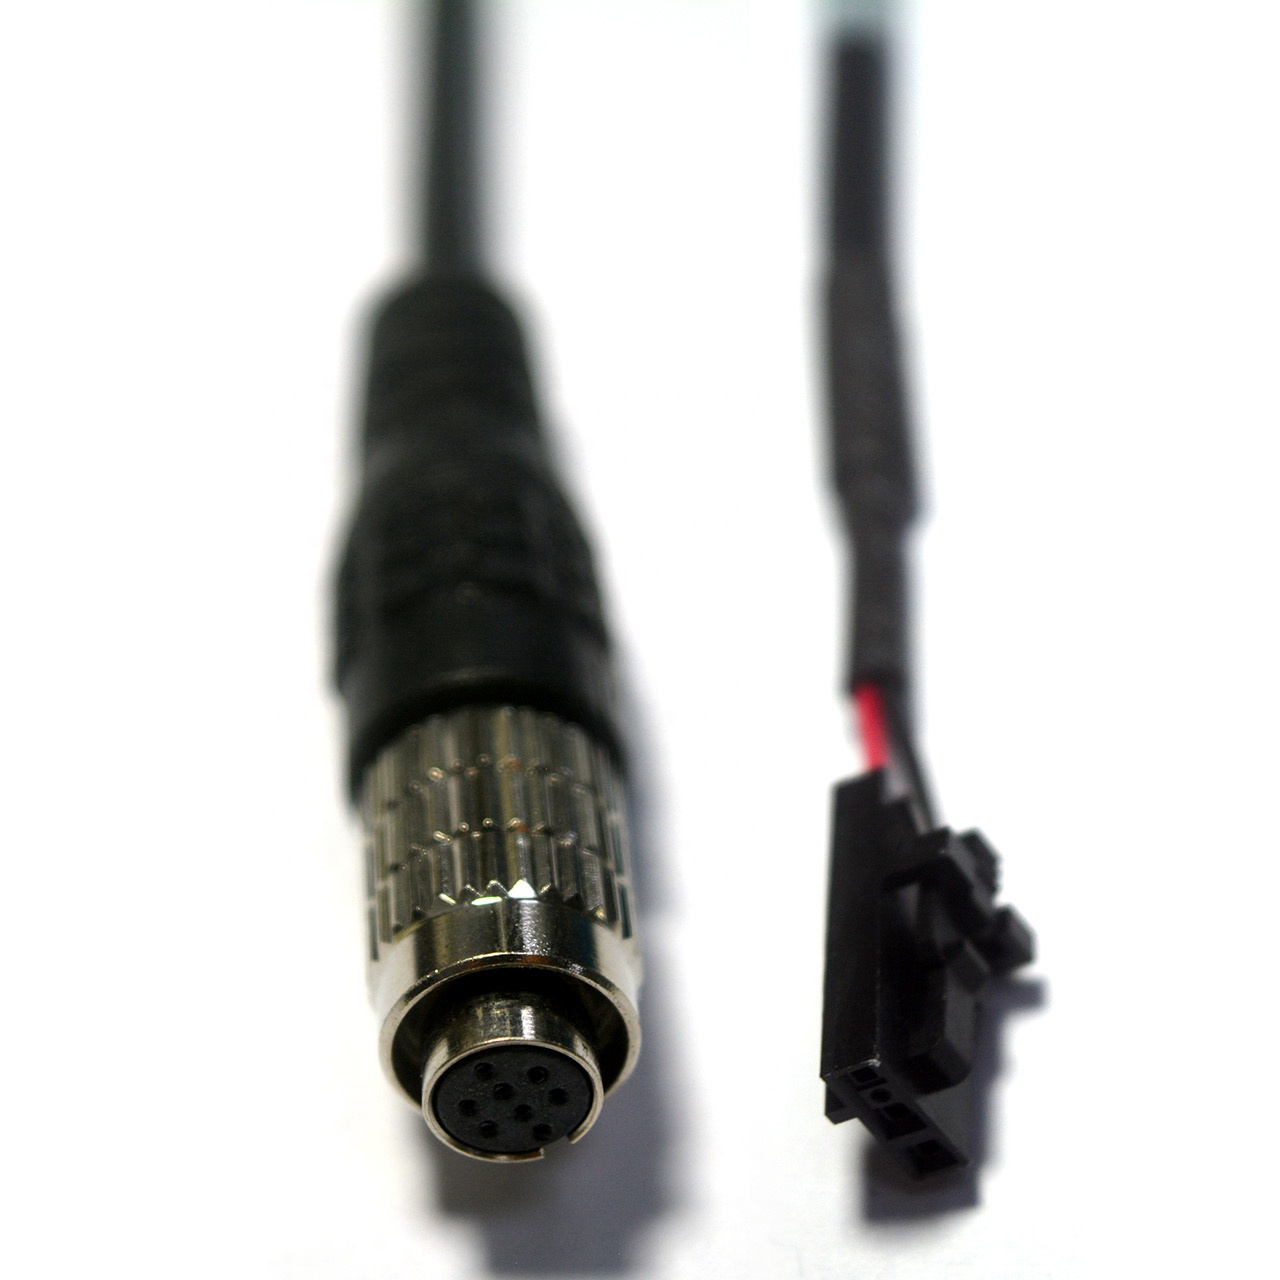 Hirose HR25-7TP-8S 8 pin female to 3 pin housing cable for industrial cameras